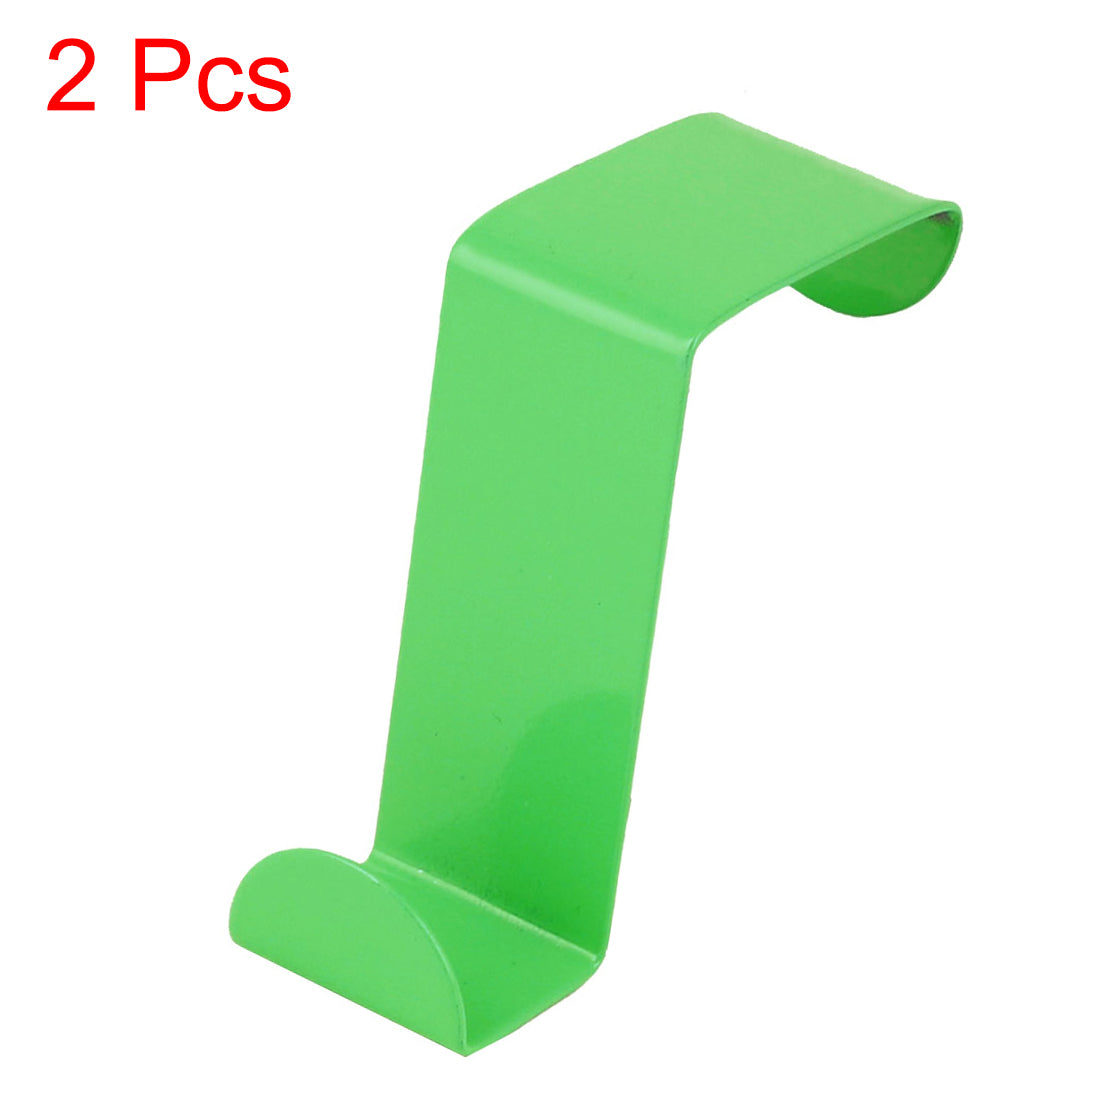 uxcell Uxcell Household Metal Z Shaped Over Door Hooks Clothes Towel Hanger Holder Green 2 Pcs